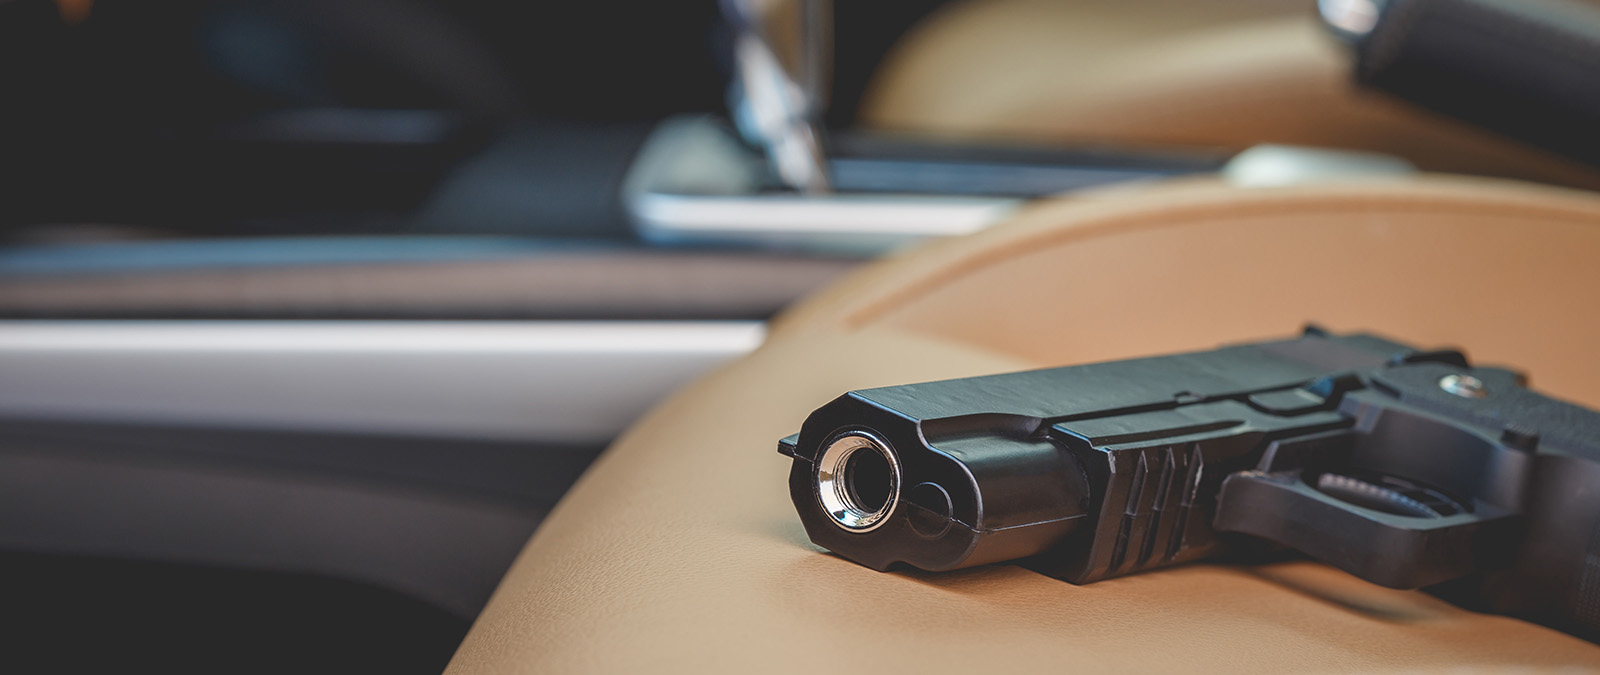 A handgun found by a four year old in the backseat results to the death of his own brother after accidentally shooting him. (Photo: Pelican)